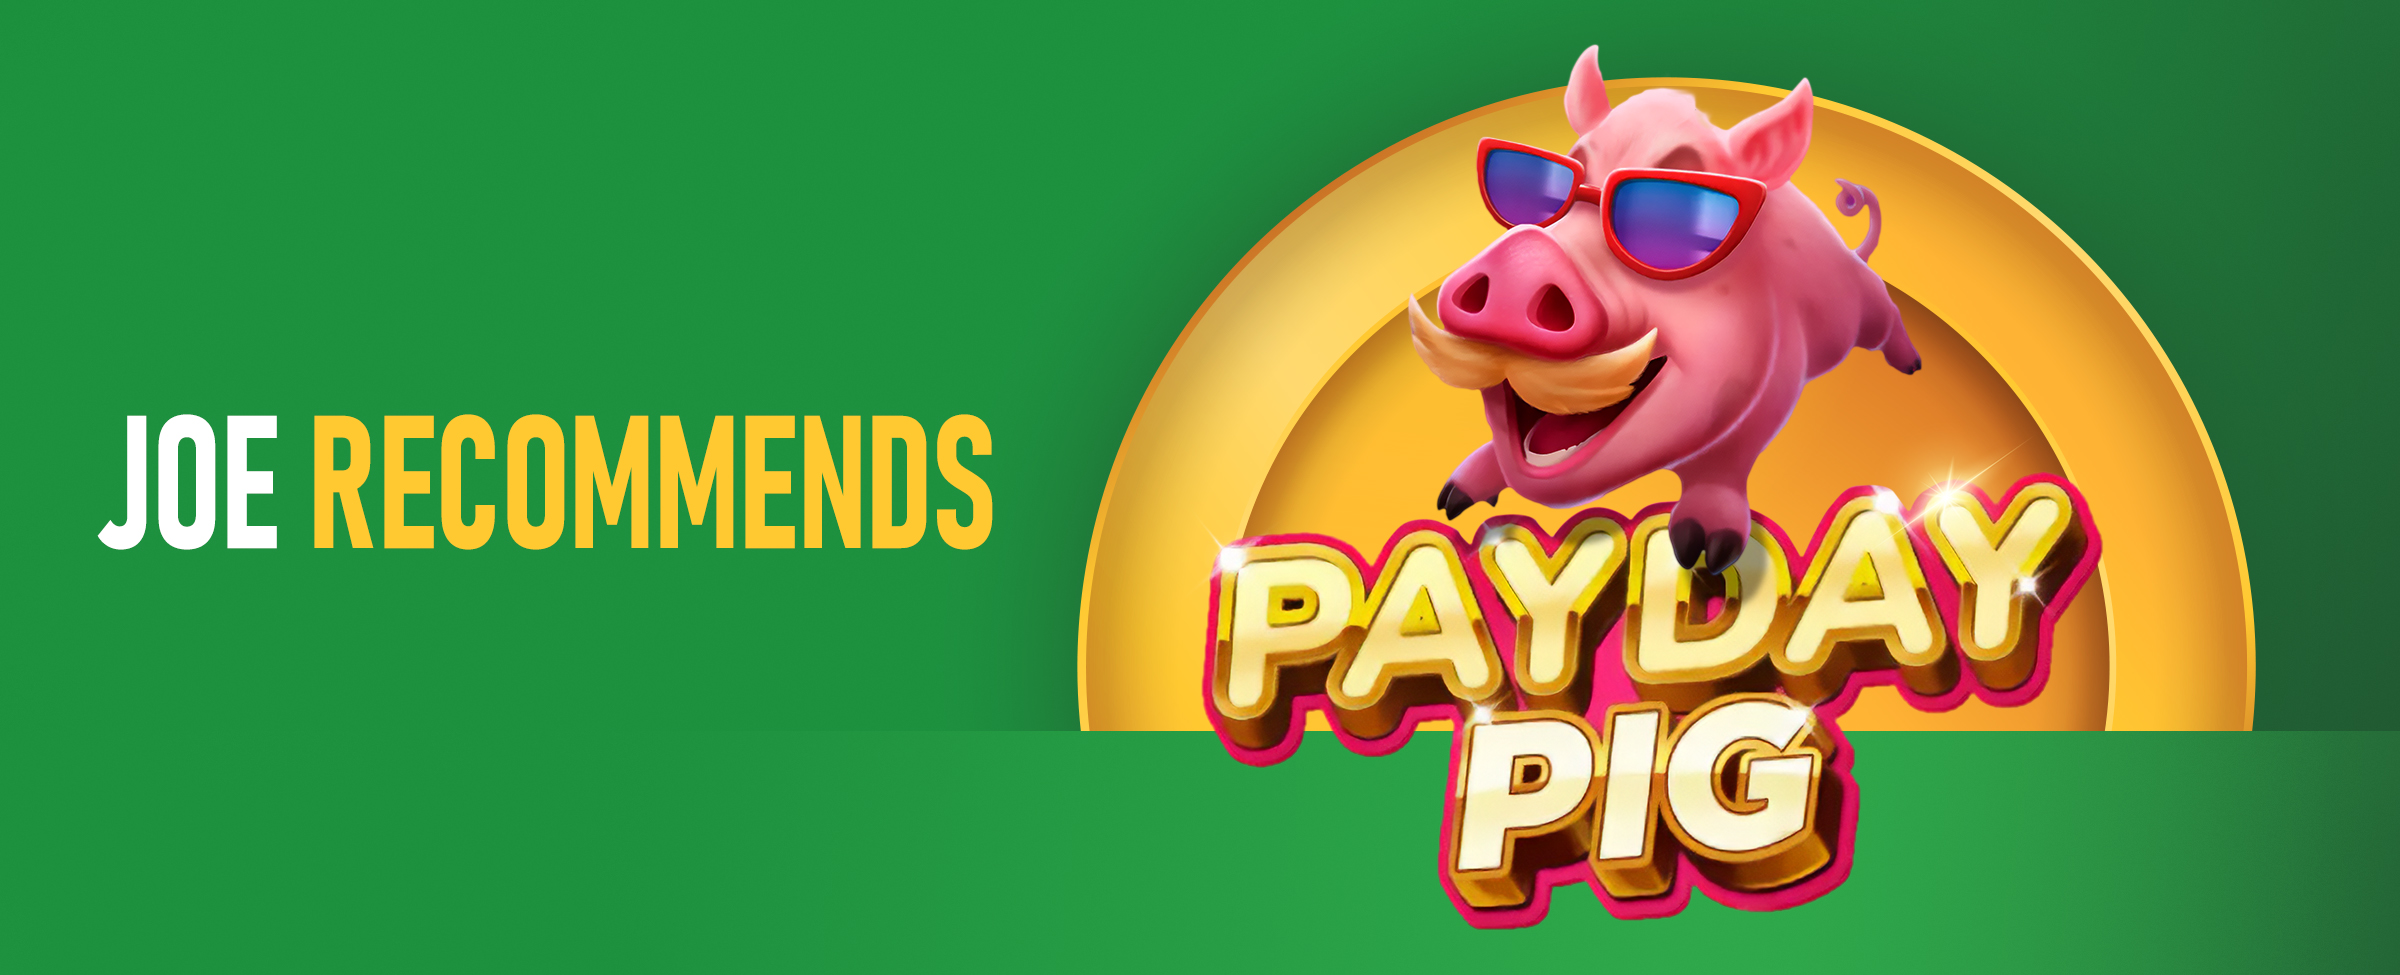 The wording ‘Joe Recommends' features alongside the logo for the Joe Fortune online pokie ‘Payday Pig’. On a vibrant two-tone green background.